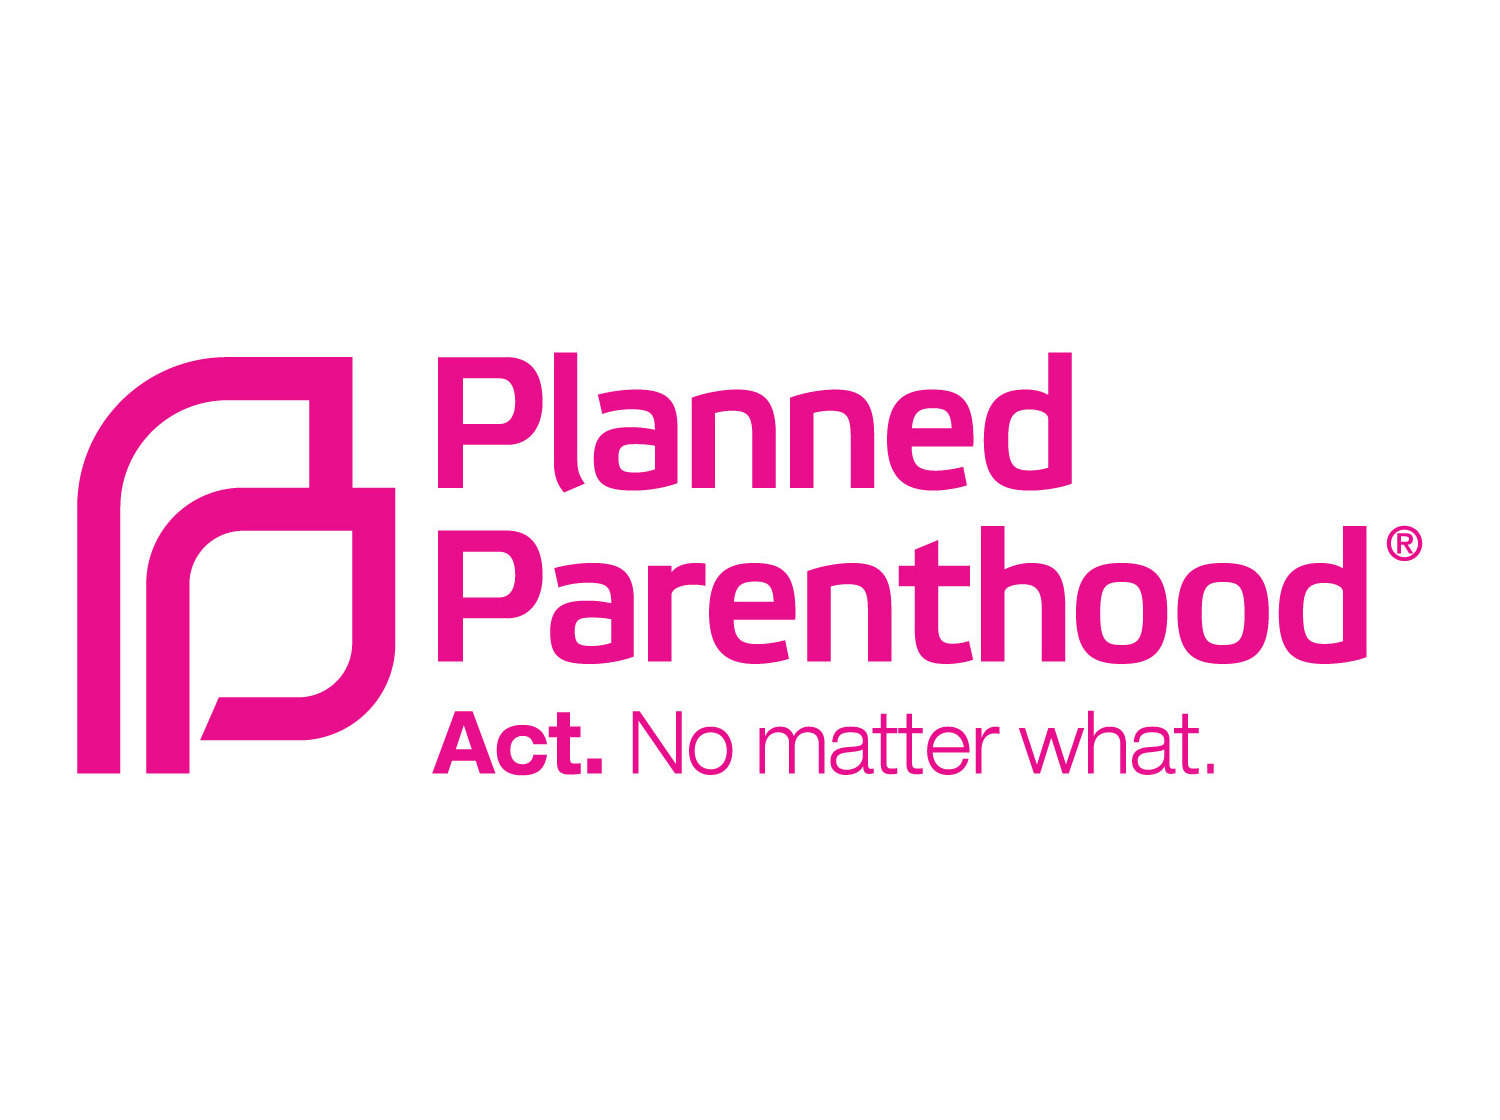 Offerings For Planned Parenthood to fight Against denying access to safe abortions